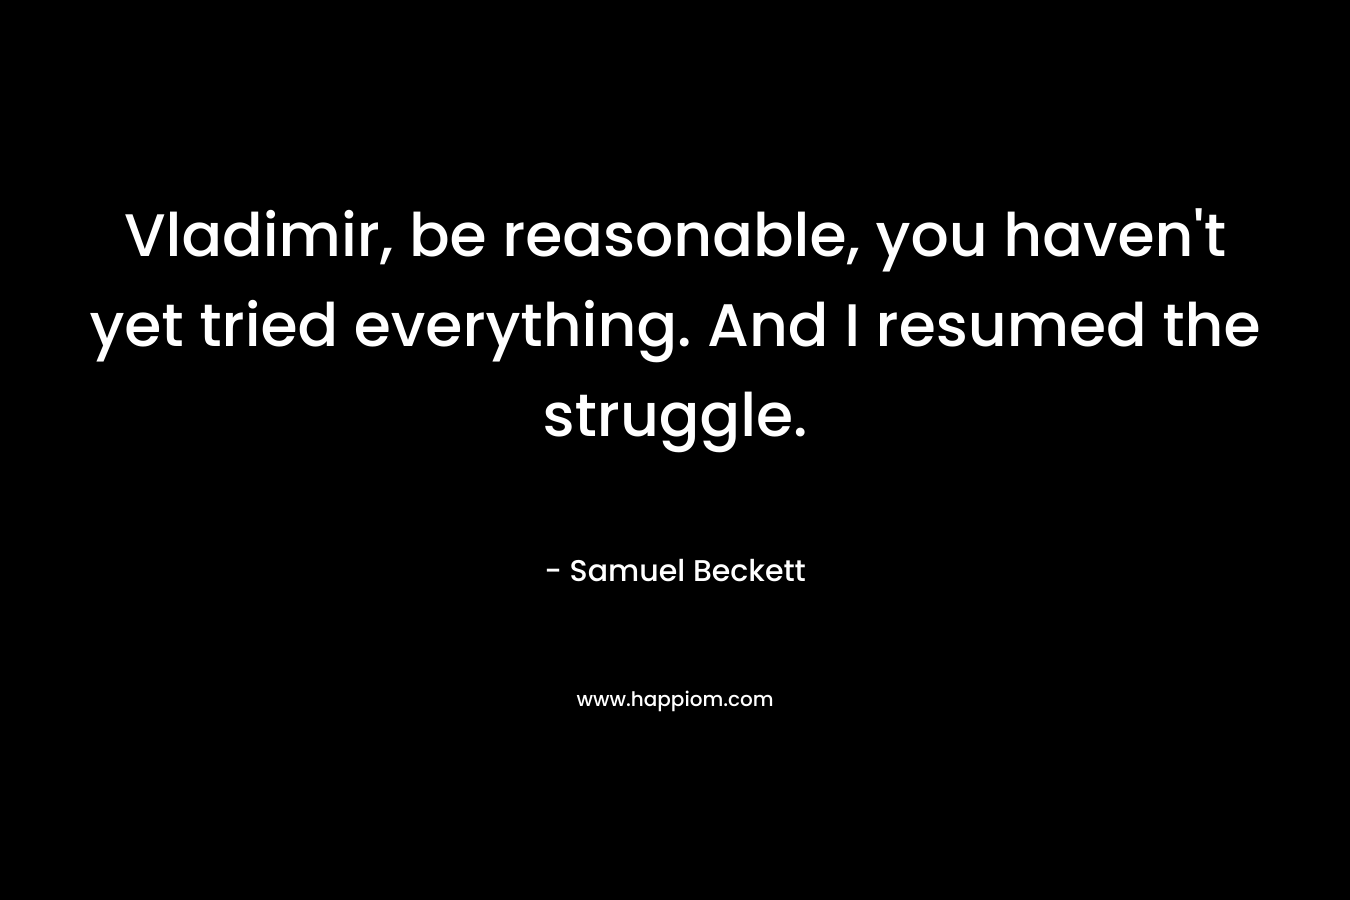 Vladimir, be reasonable, you haven’t yet tried everything. And I resumed the struggle. – Samuel Beckett